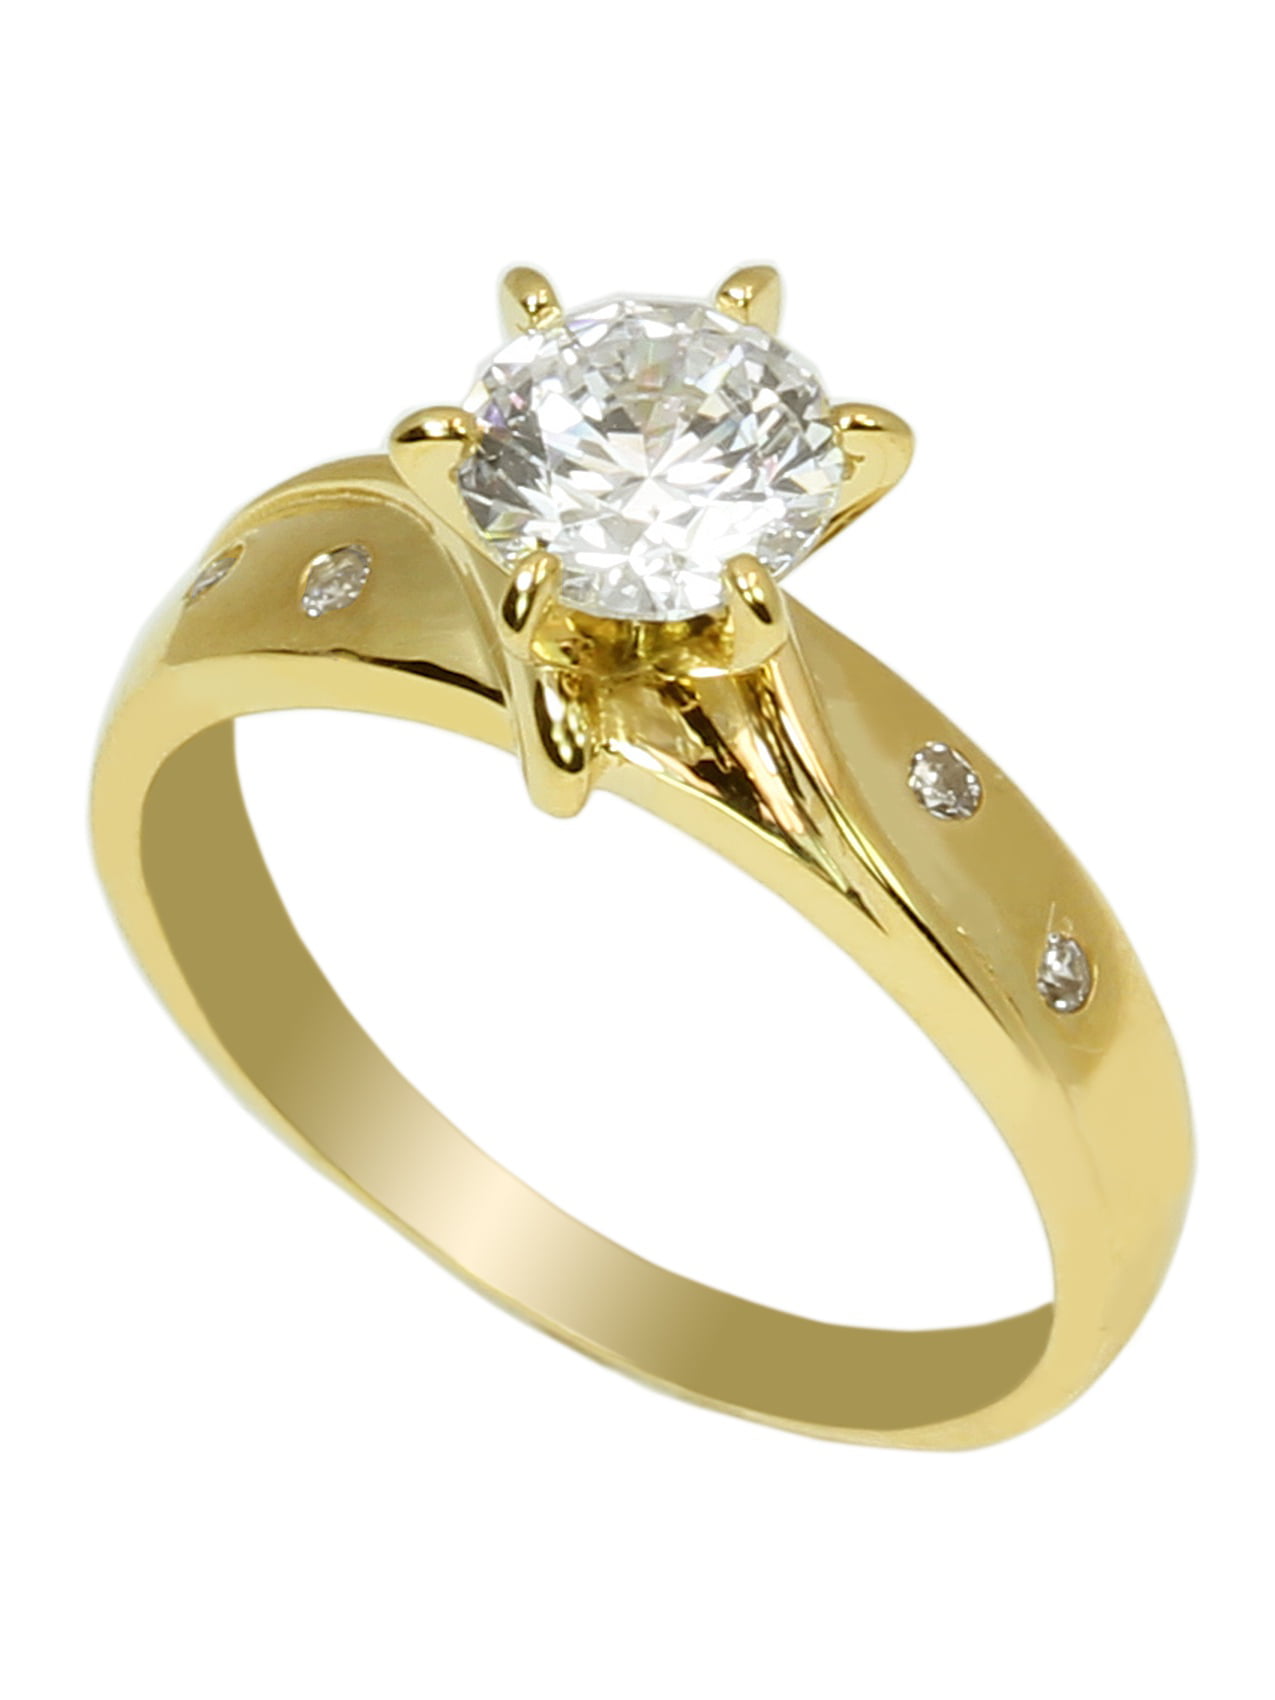 JamesJenny Yellow Gold Plated 0.9ct Round CZ Solitaire Fashion Ring Size 4-10 